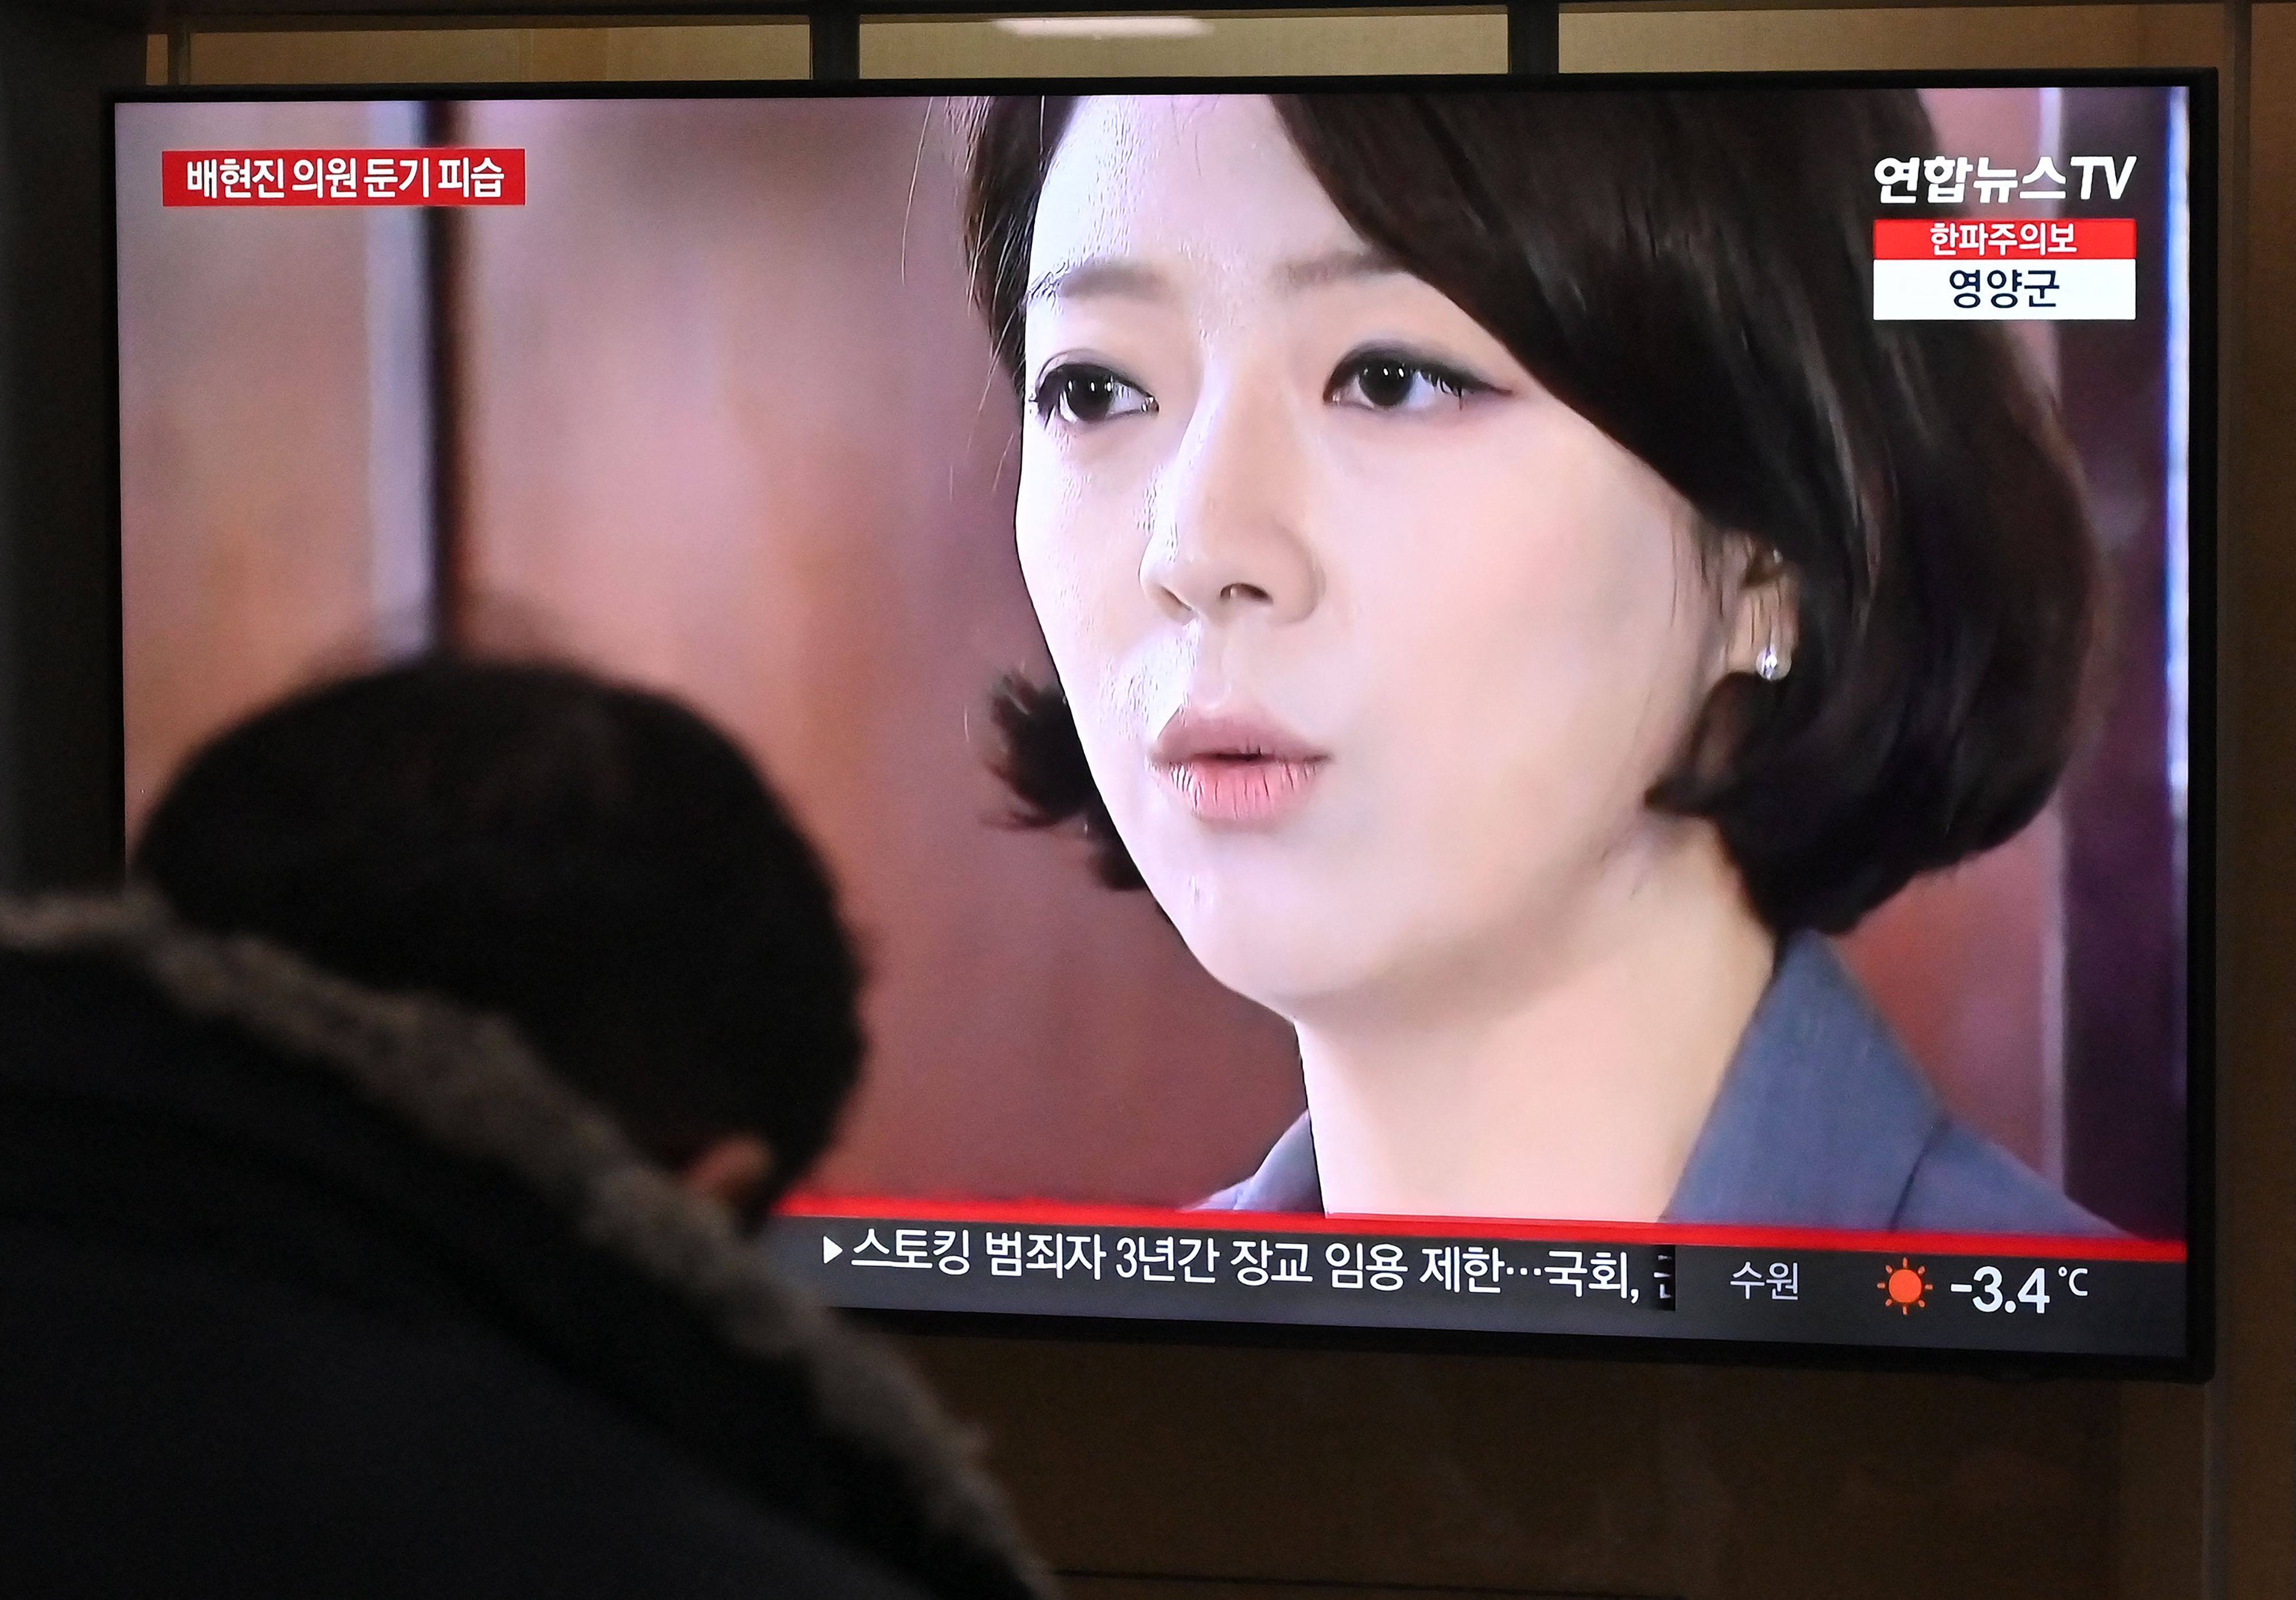 A television screen shows a news broadcast of ruling party lawmaker Bae Hyun-jin being attacked. Photo: AFP